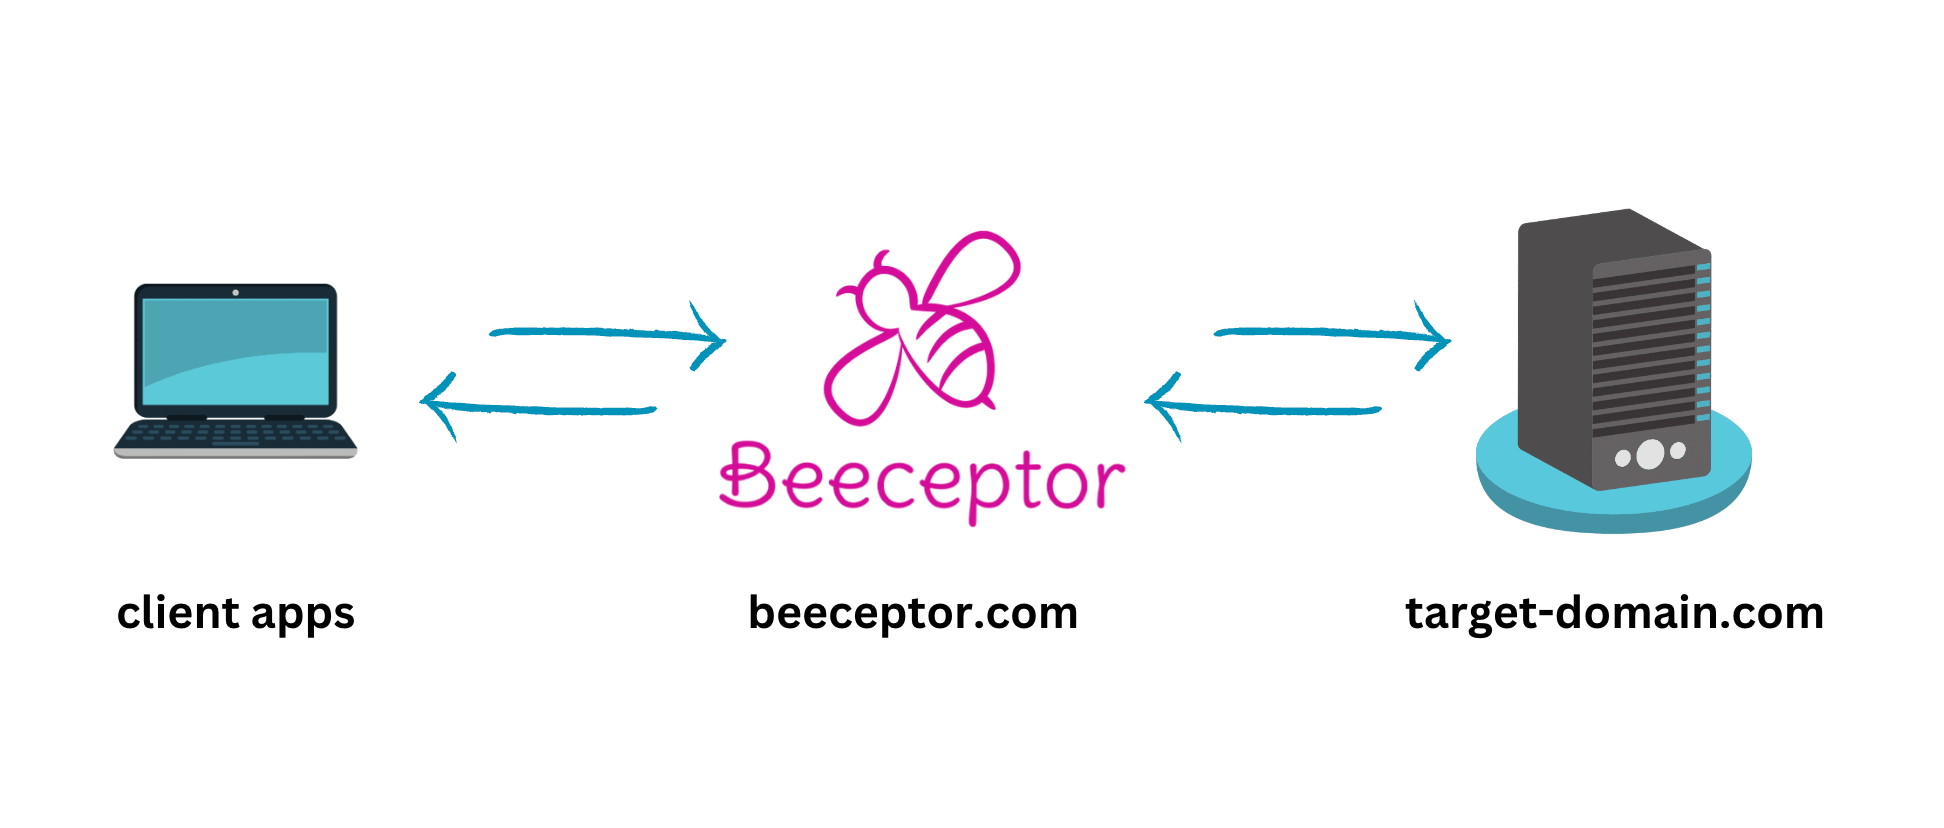 beeceptor's proxy is a domain-to-domain mapping